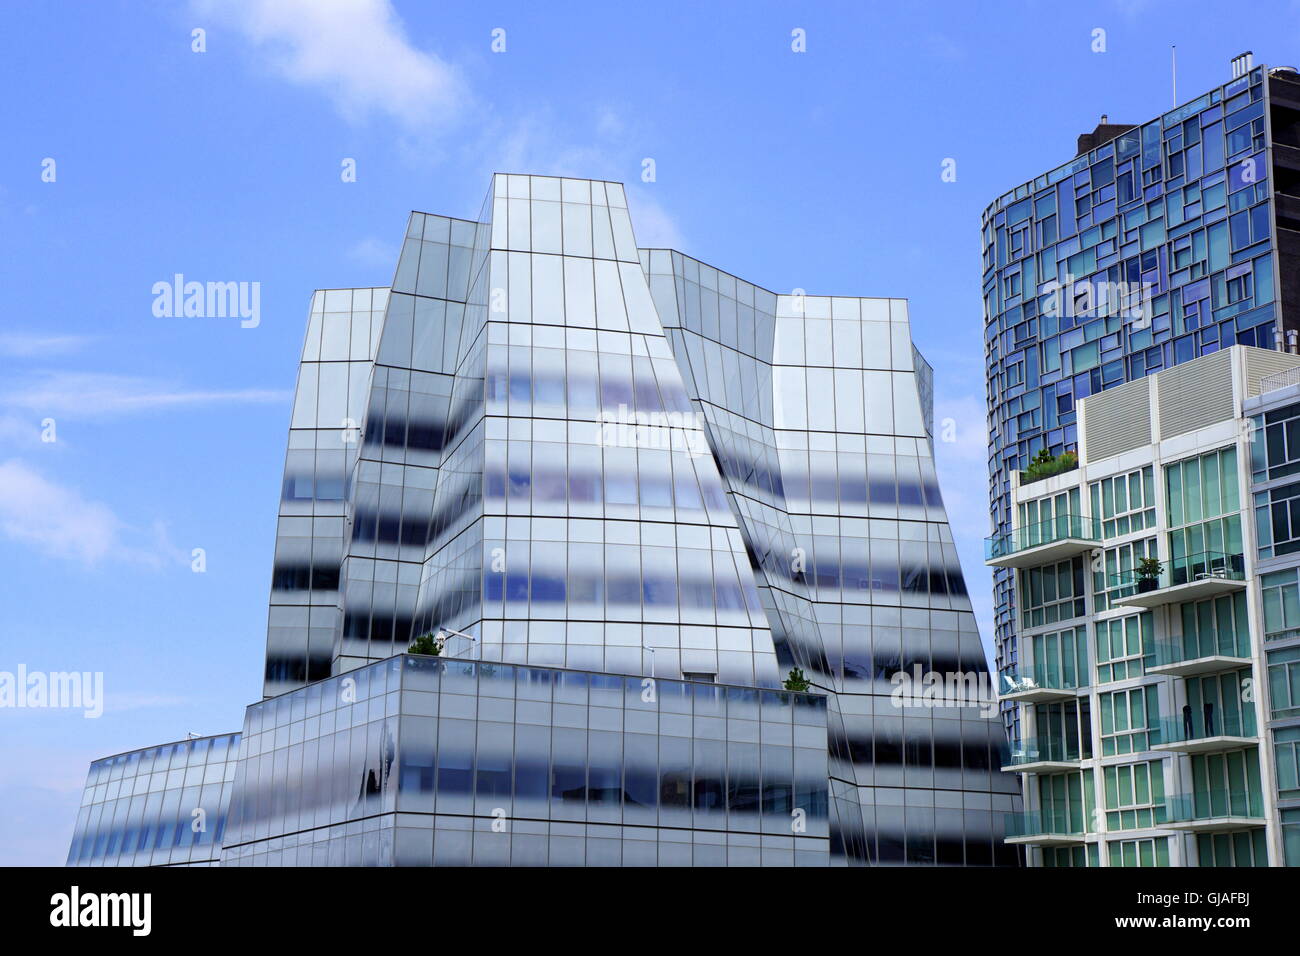 A view of the IAC (InterActive Corp) and 100 Eleventh Ave buildings from the High Line in the Chelsea area in New York City, NY Stock Photo